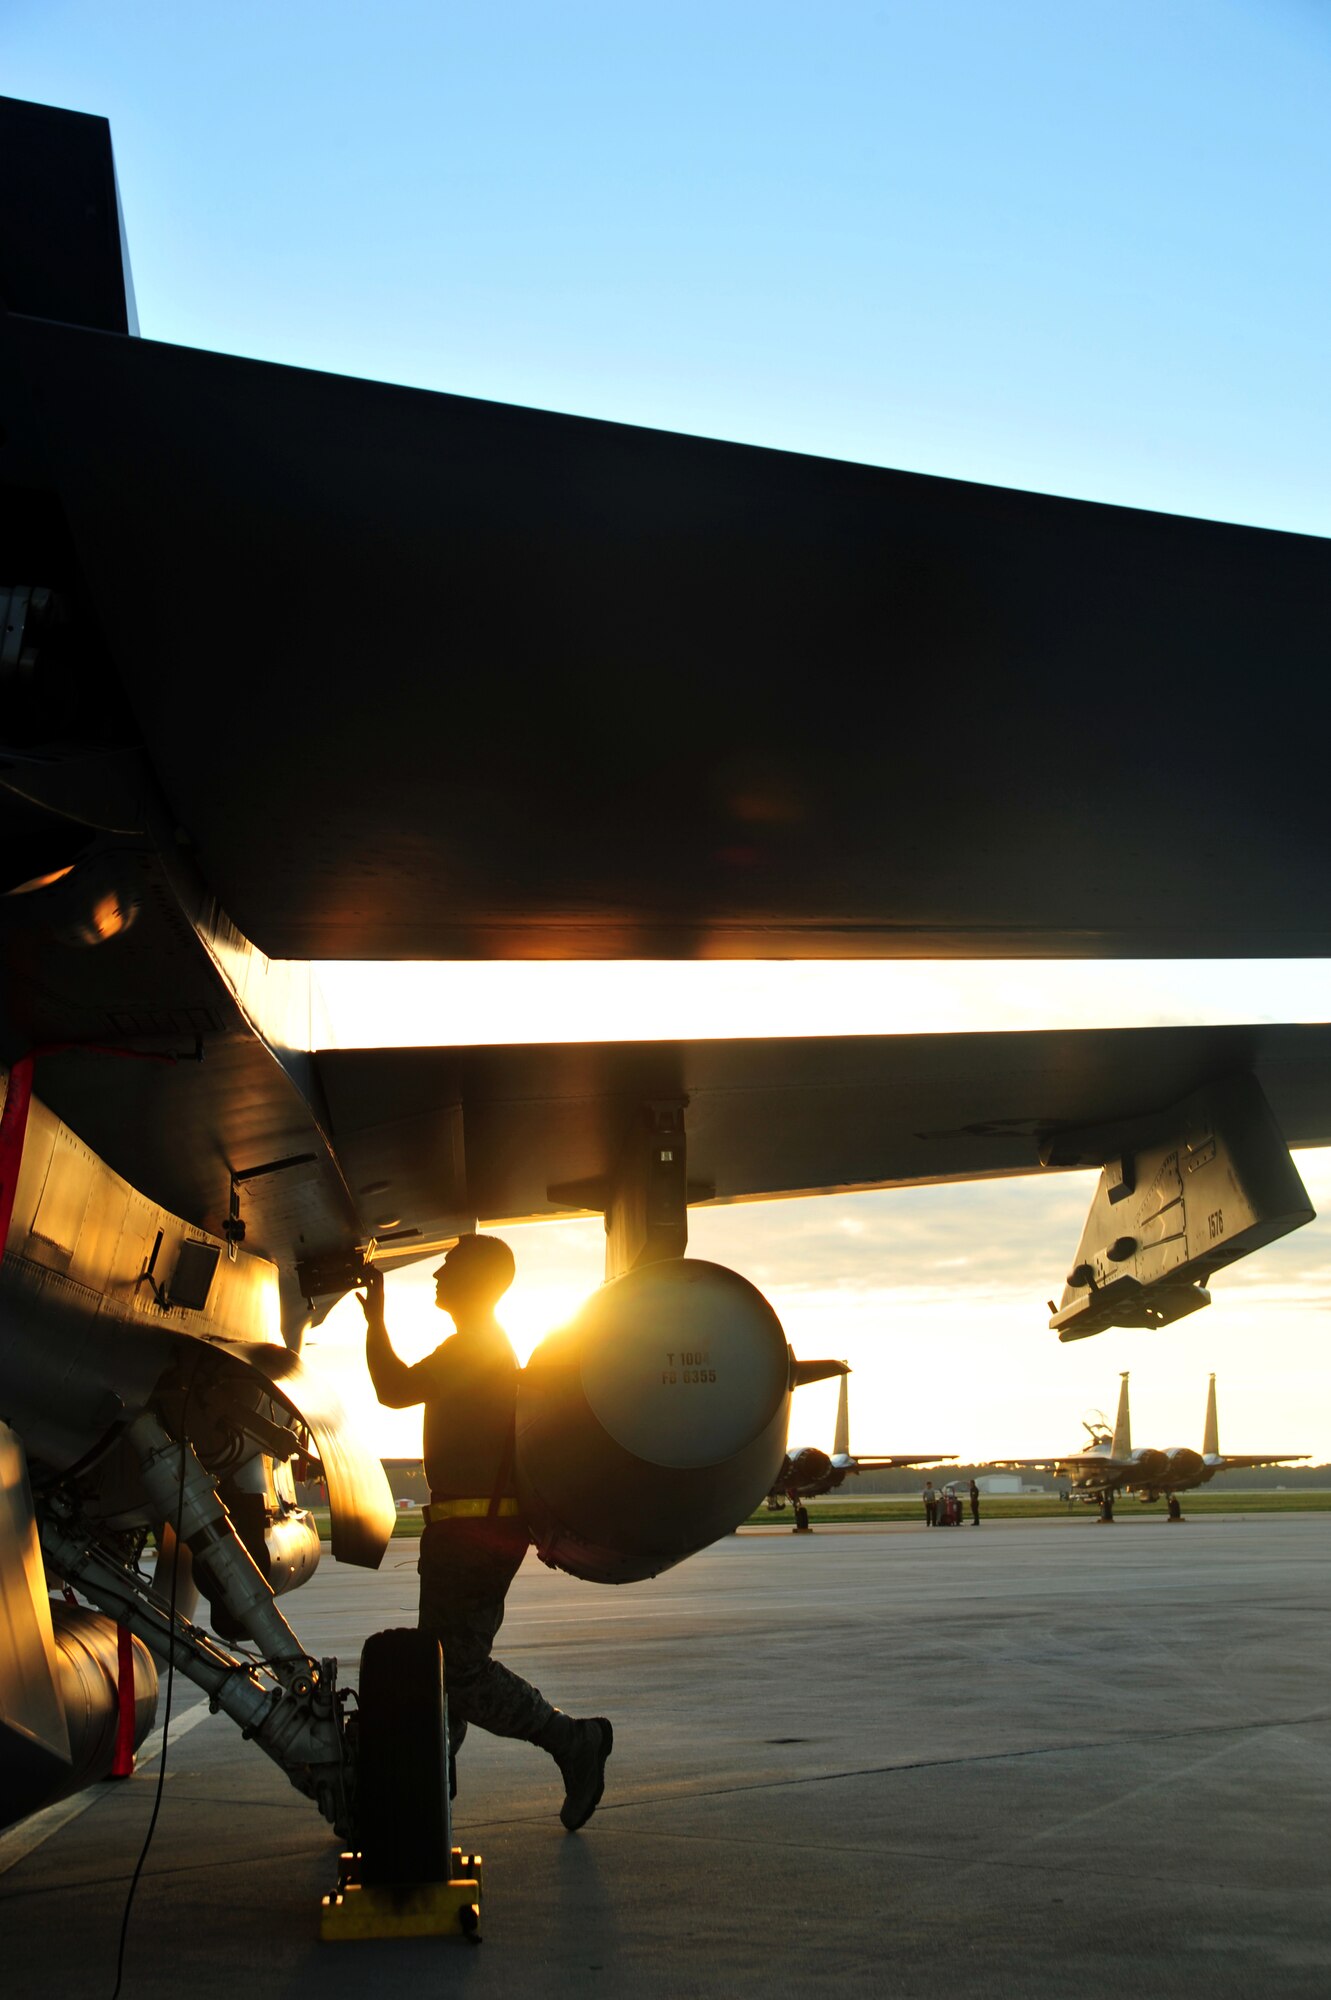 Senior Airman Josh Miller, an F-16 mechanic from the 180th Fighter Wing, Ohio Air National Guard, conducts a preflight inspection on a fighter jet before an early morning a training sortie Sept. 15, at Tyndall Air Force Base, Fla. About 120 Airmen from the 180th FW traveled to Tyndall to participate in the Combat Archer exercise, a weapons system evaluation program designed to test the effectiveness of our Airmen and air-to-air weapon system capability of our F-16s and other combat aircraft. Training allows our pilots to provide a vital link for the defense of our country. Air National Guard photo by Senior Master Sgt. Beth Holliker/Released